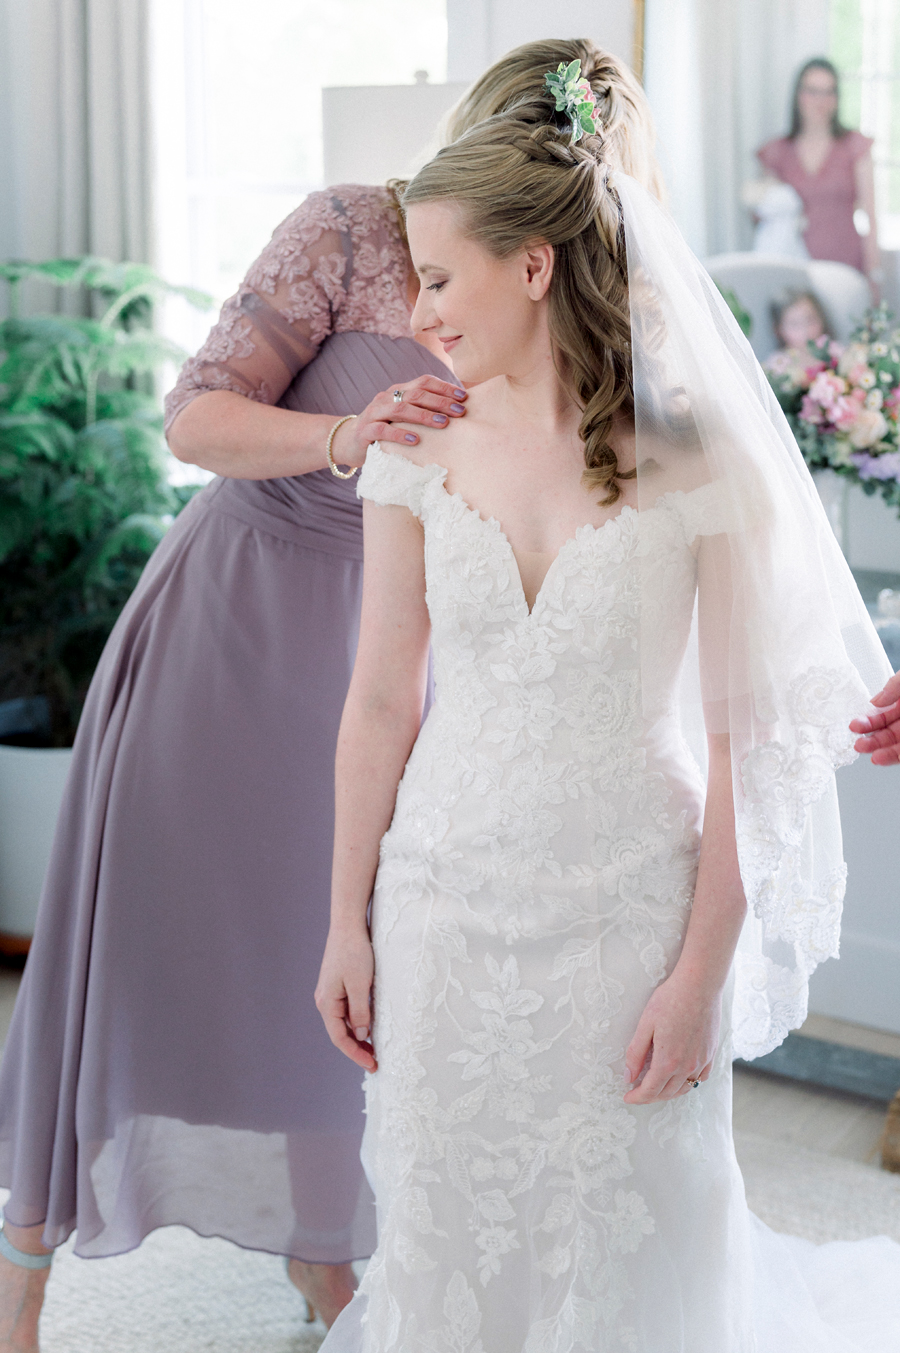 The bride's mother adjusts her veil at a Blue Bell Farm wedding by Love Tree Studios.